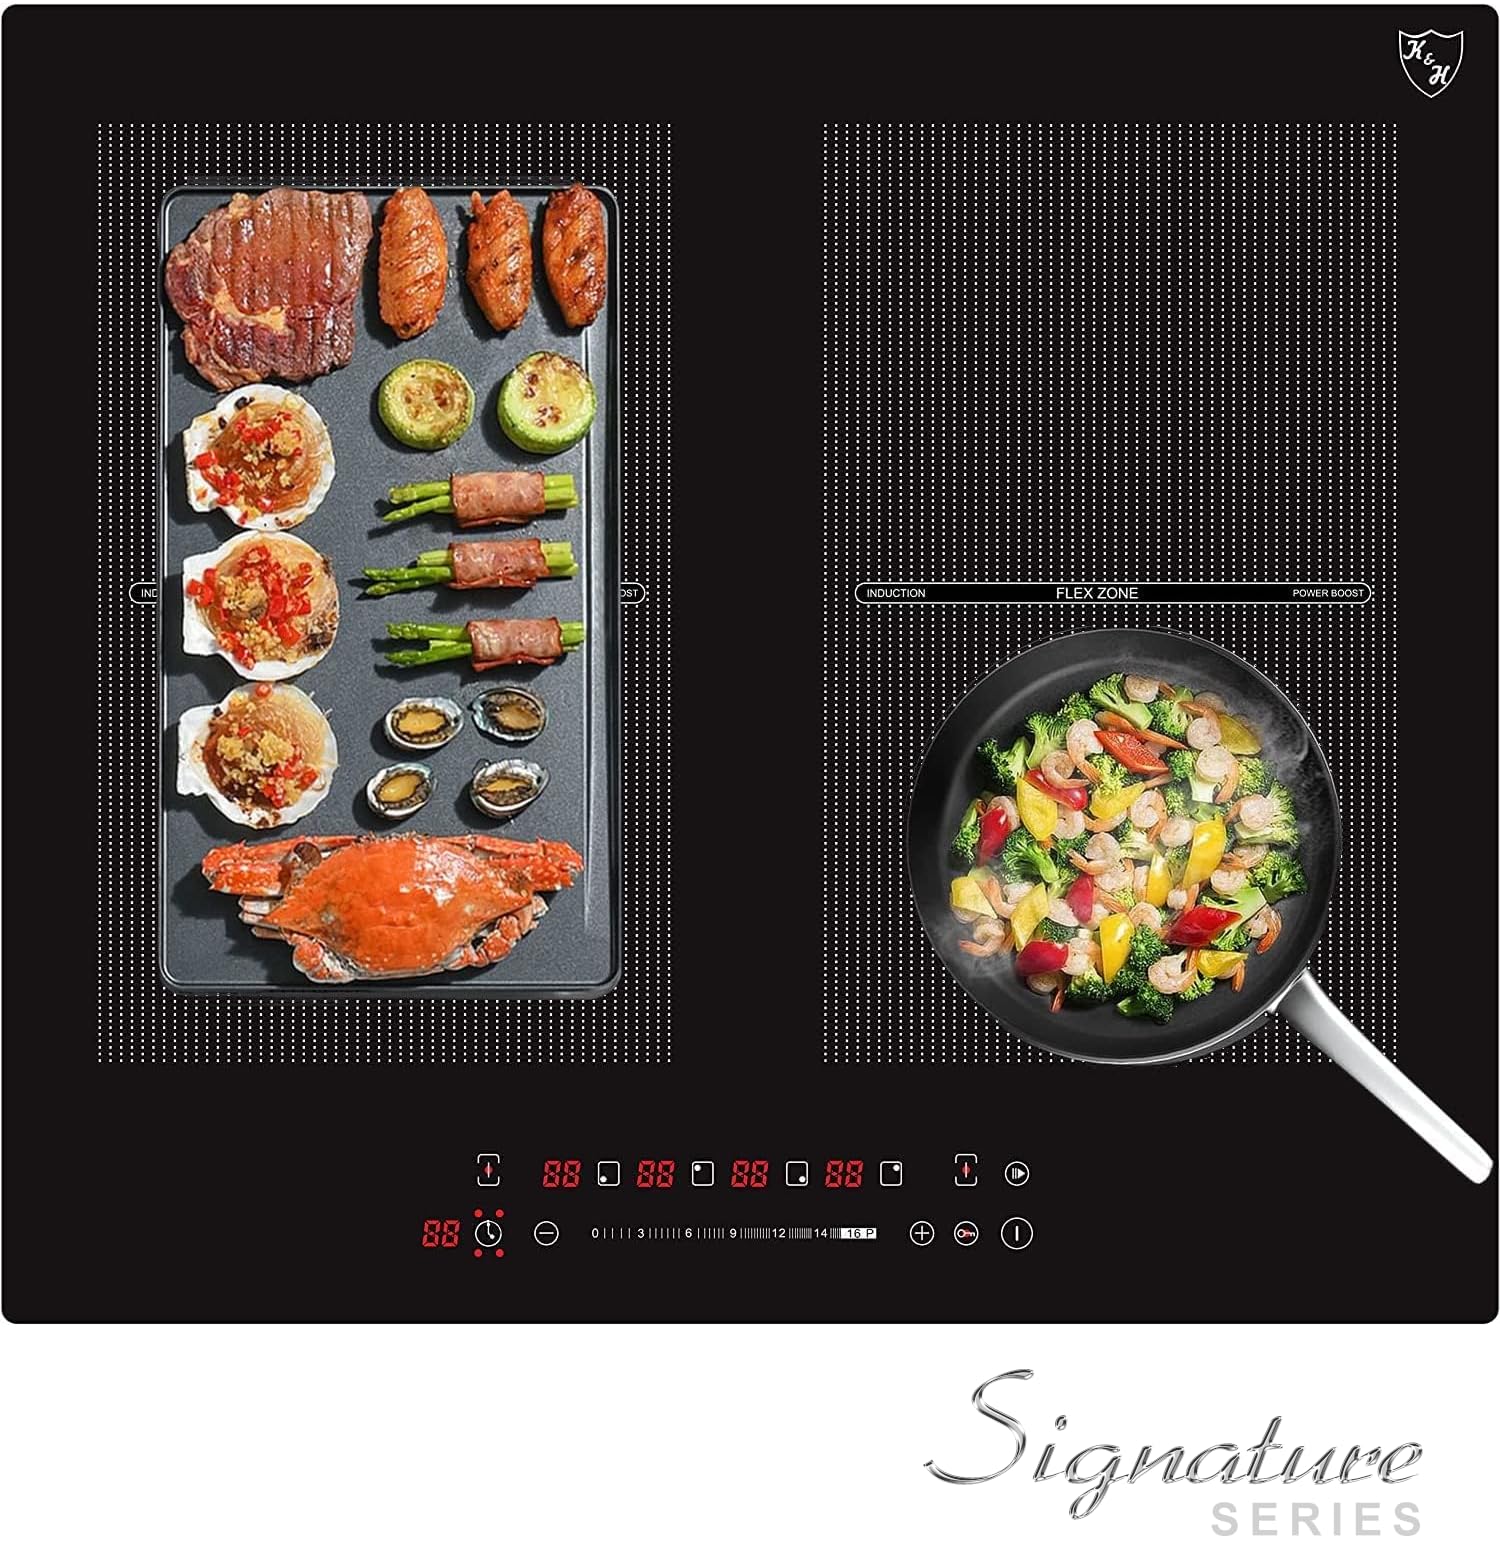 K&H SIGNATURE SERIES 4 Burner 24 Inch Built-in Induction FLEX Electric Stove Top Ceramic Cooktop SLIDER Touch Control 240V 6800W IN24-6004FLX